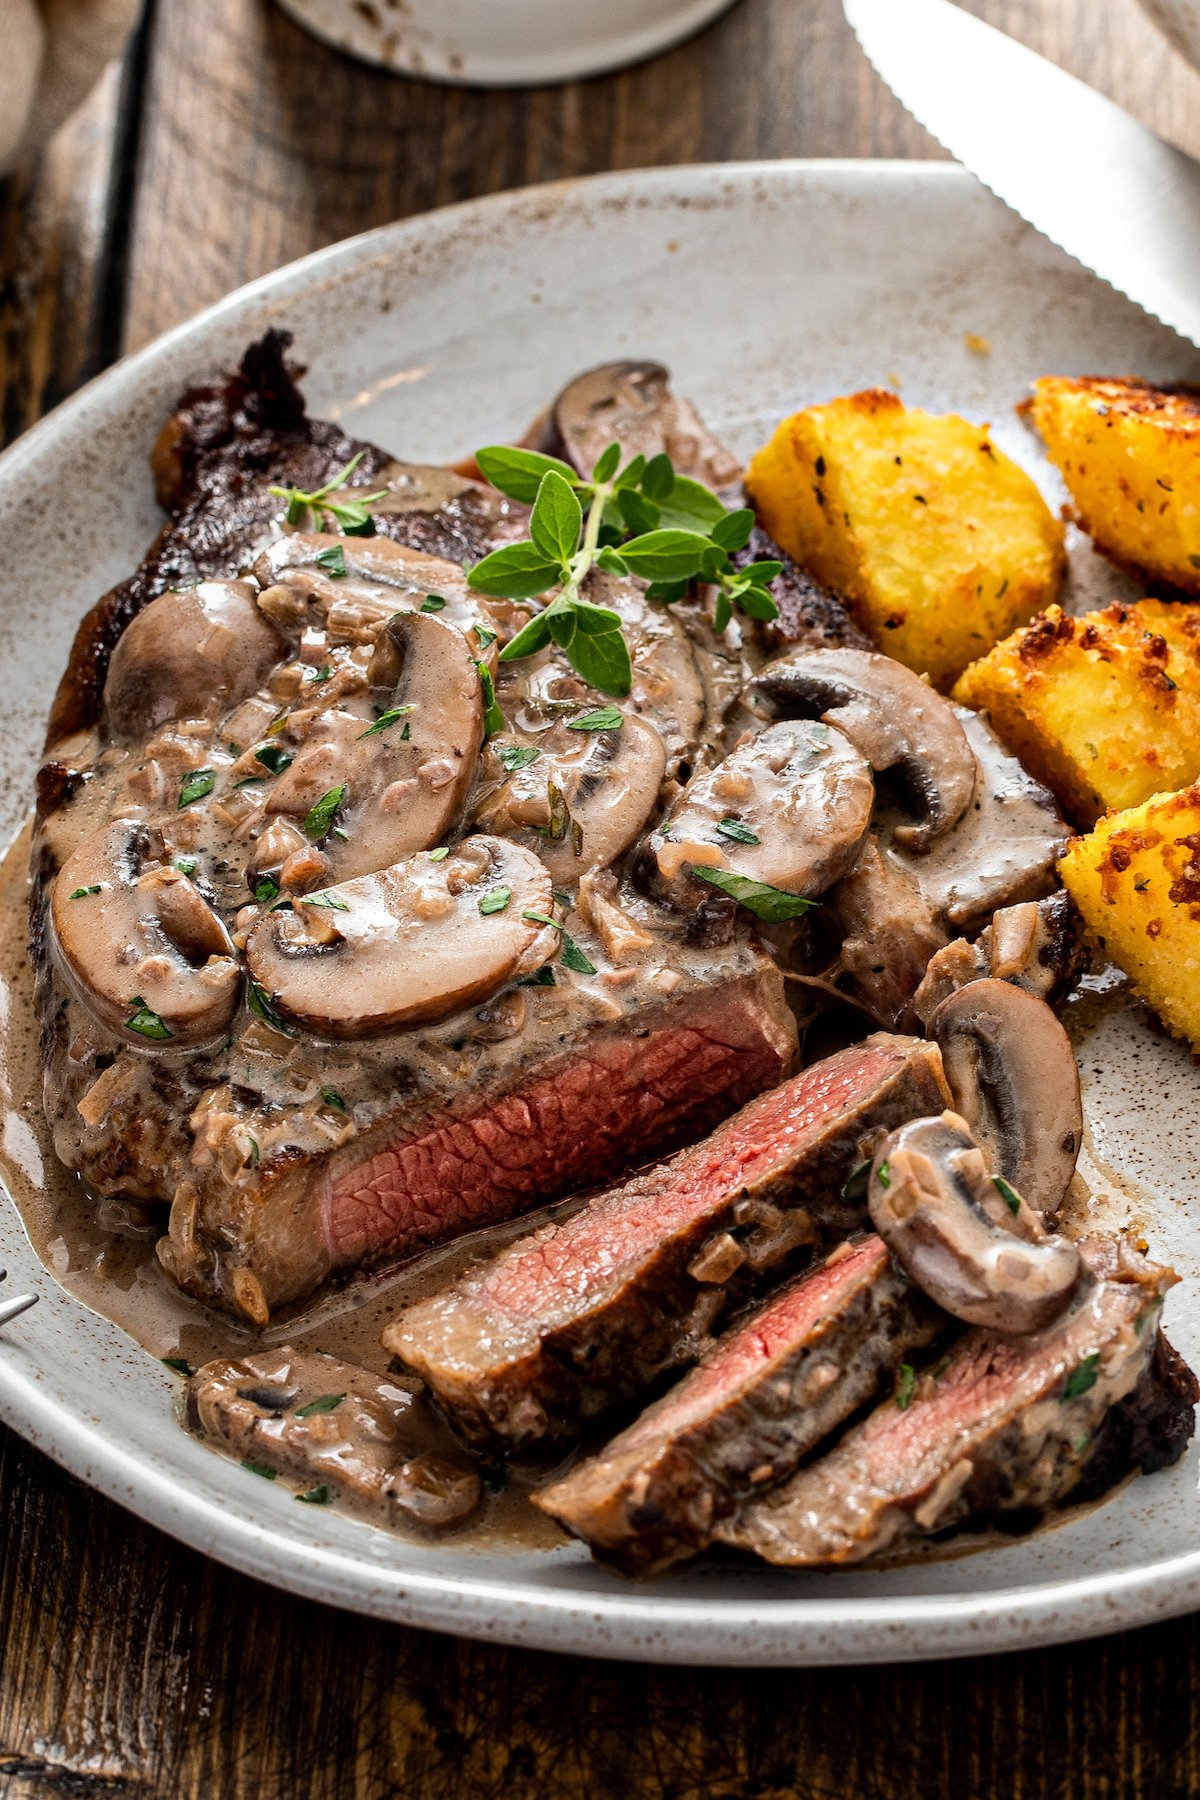 A platter of sliced, medium-well steak topped with creamy mushrooms and a garnish of parsley.